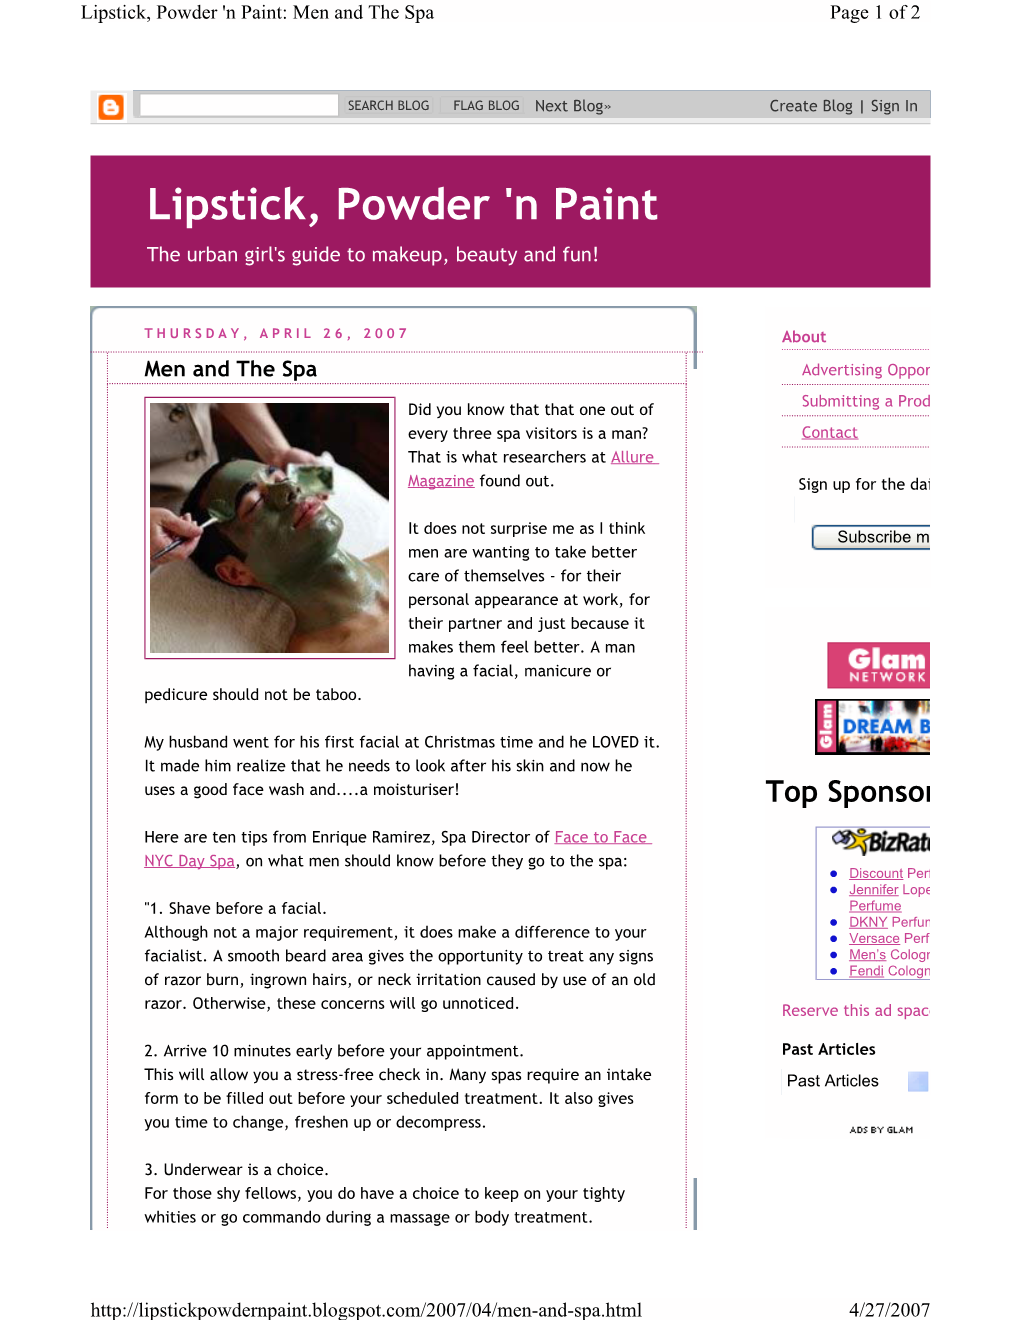 Lipstick, Powder 'N Paint: Men and the Spa Page 1 of 2